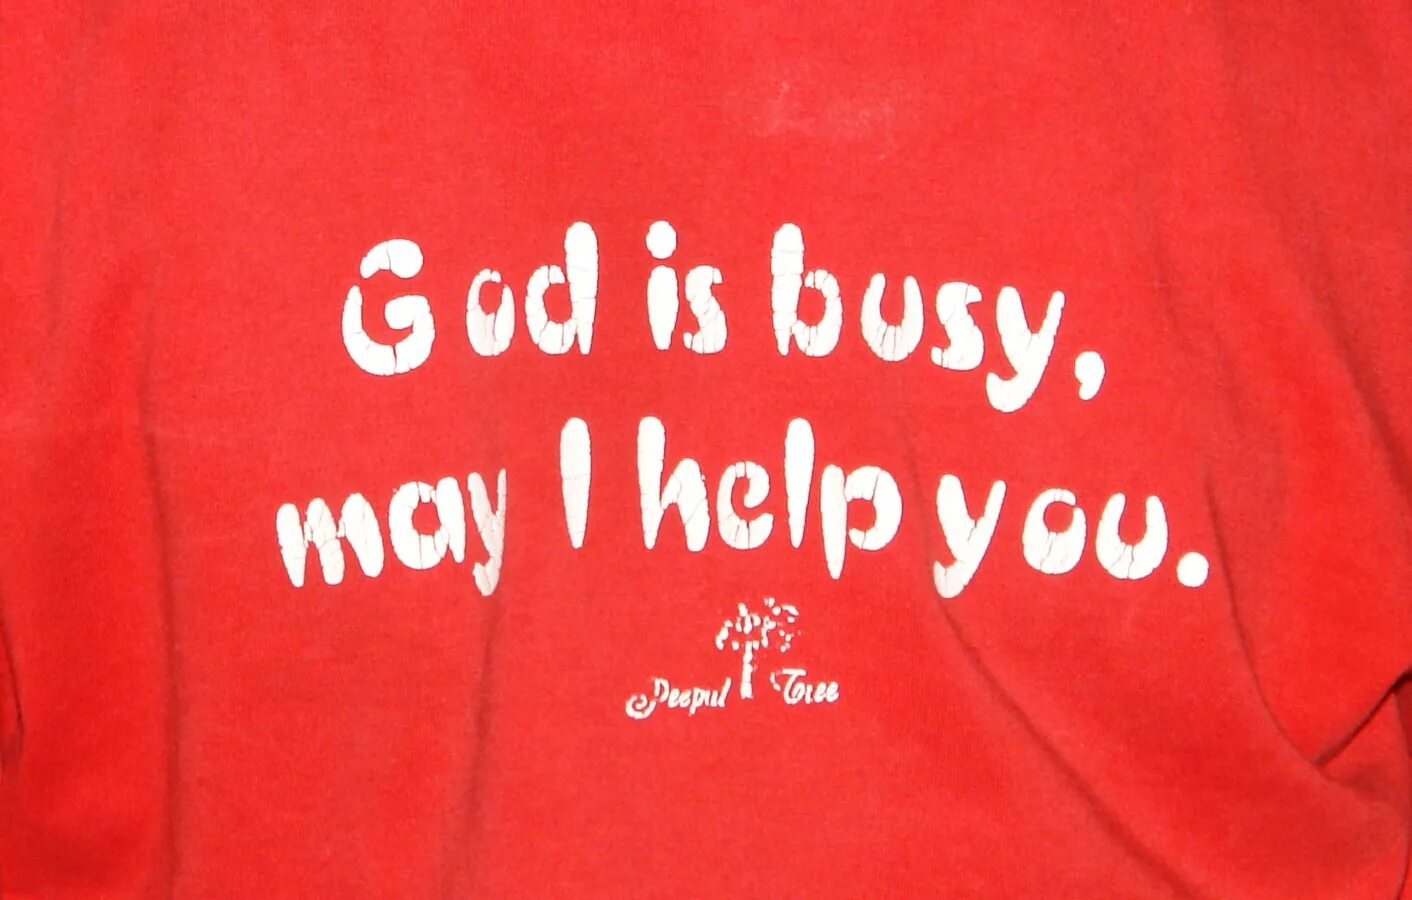 God is busy can i help you плакат. How May i help you. God is busy can i help you футболка. Куртка God is busy can i help you. Can you help me out